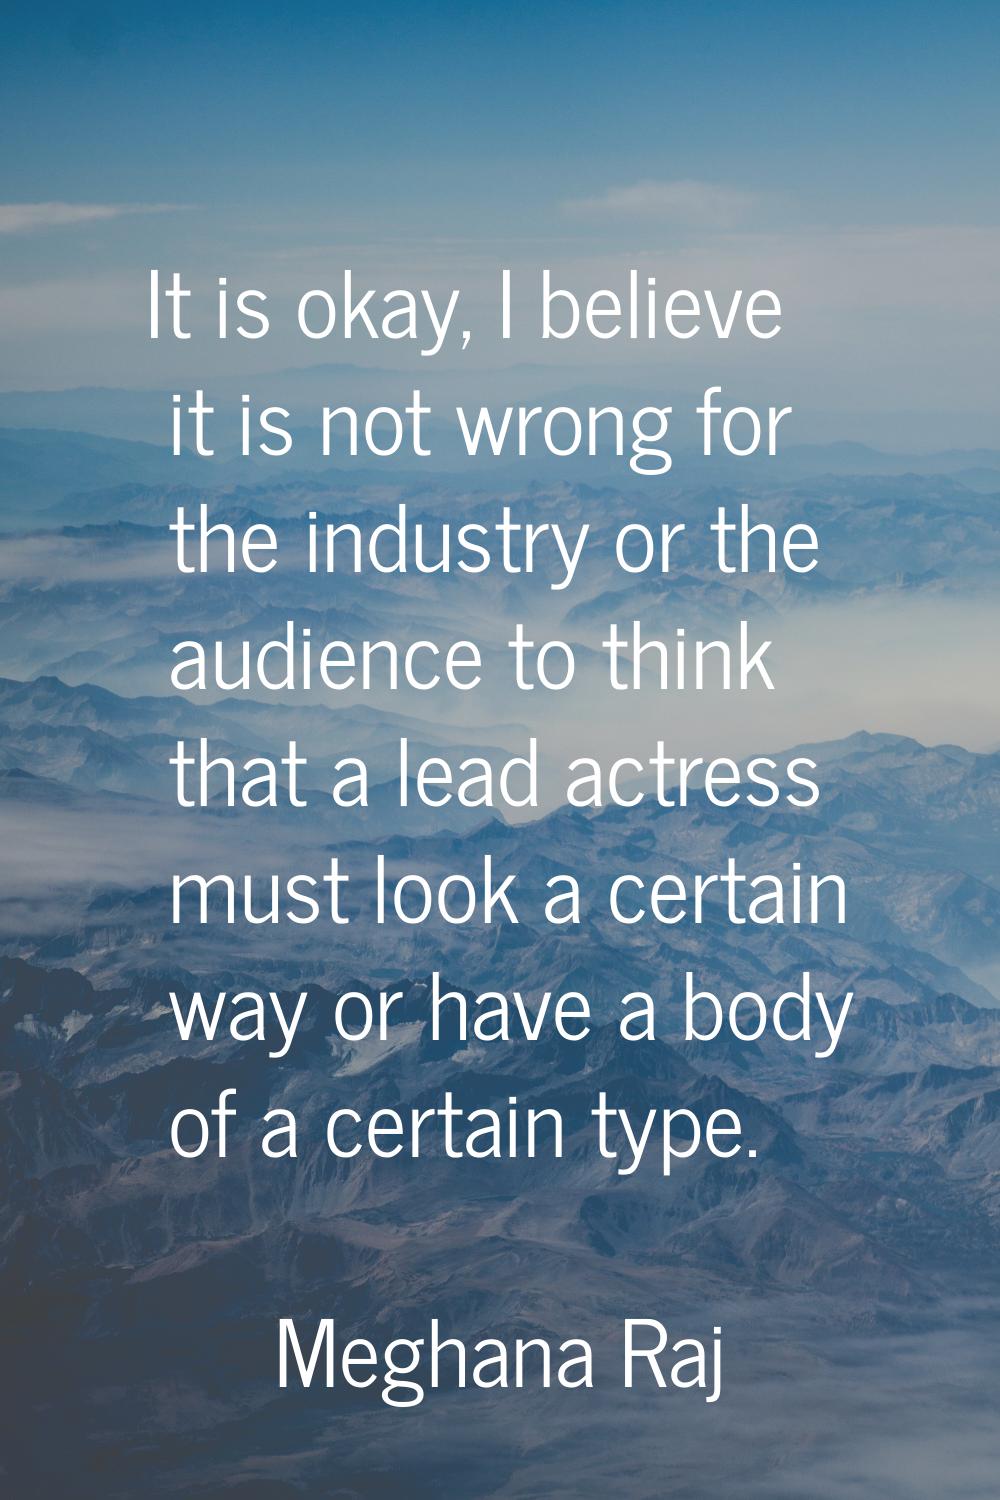 It is okay, I believe it is not wrong for the industry or the audience to think that a lead actress